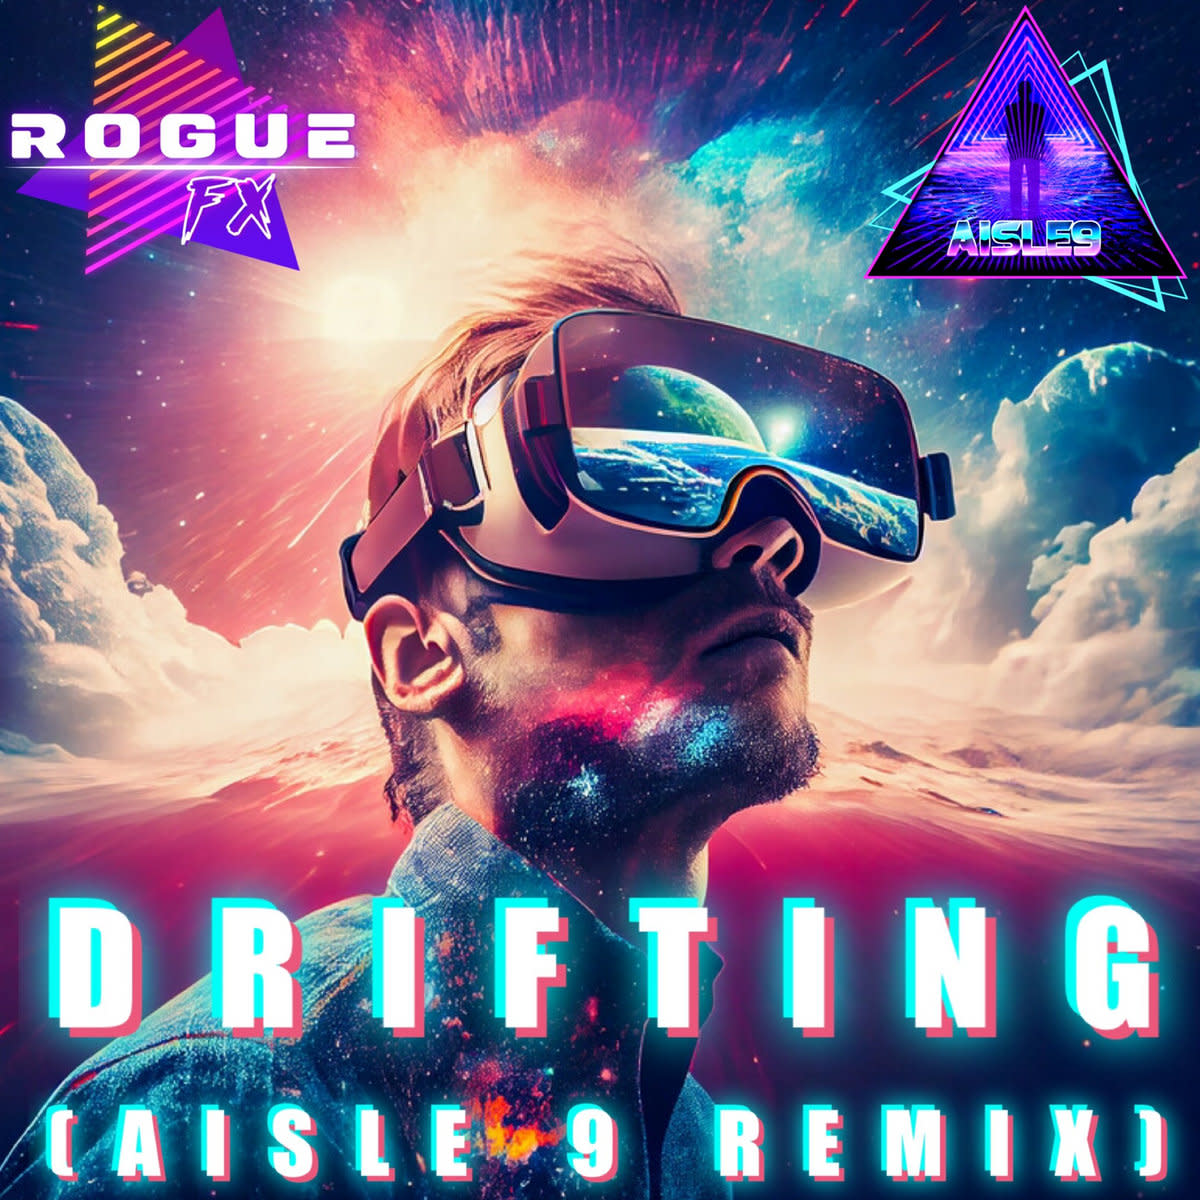 Synth Single Review: “Drifting” by Rogue FX & remixed by Aisle 9